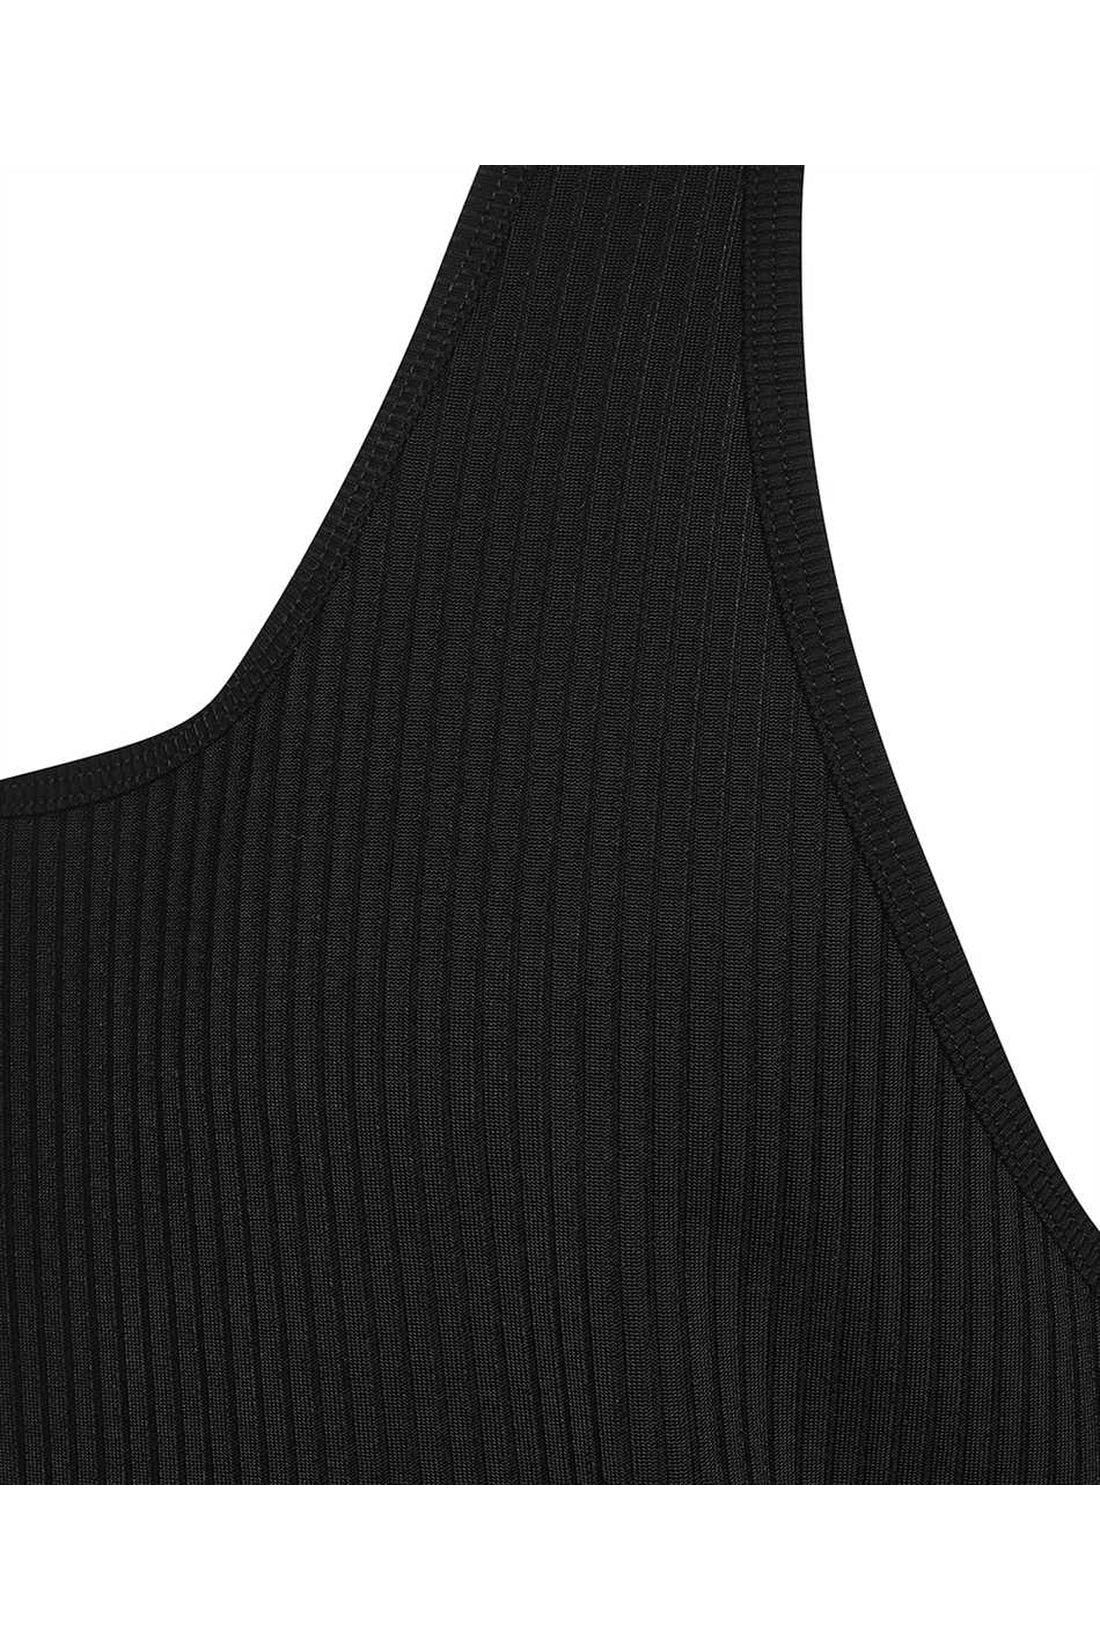 Tom Ford-OUTLET-SALE-Jersey tank-top-ARCHIVIST